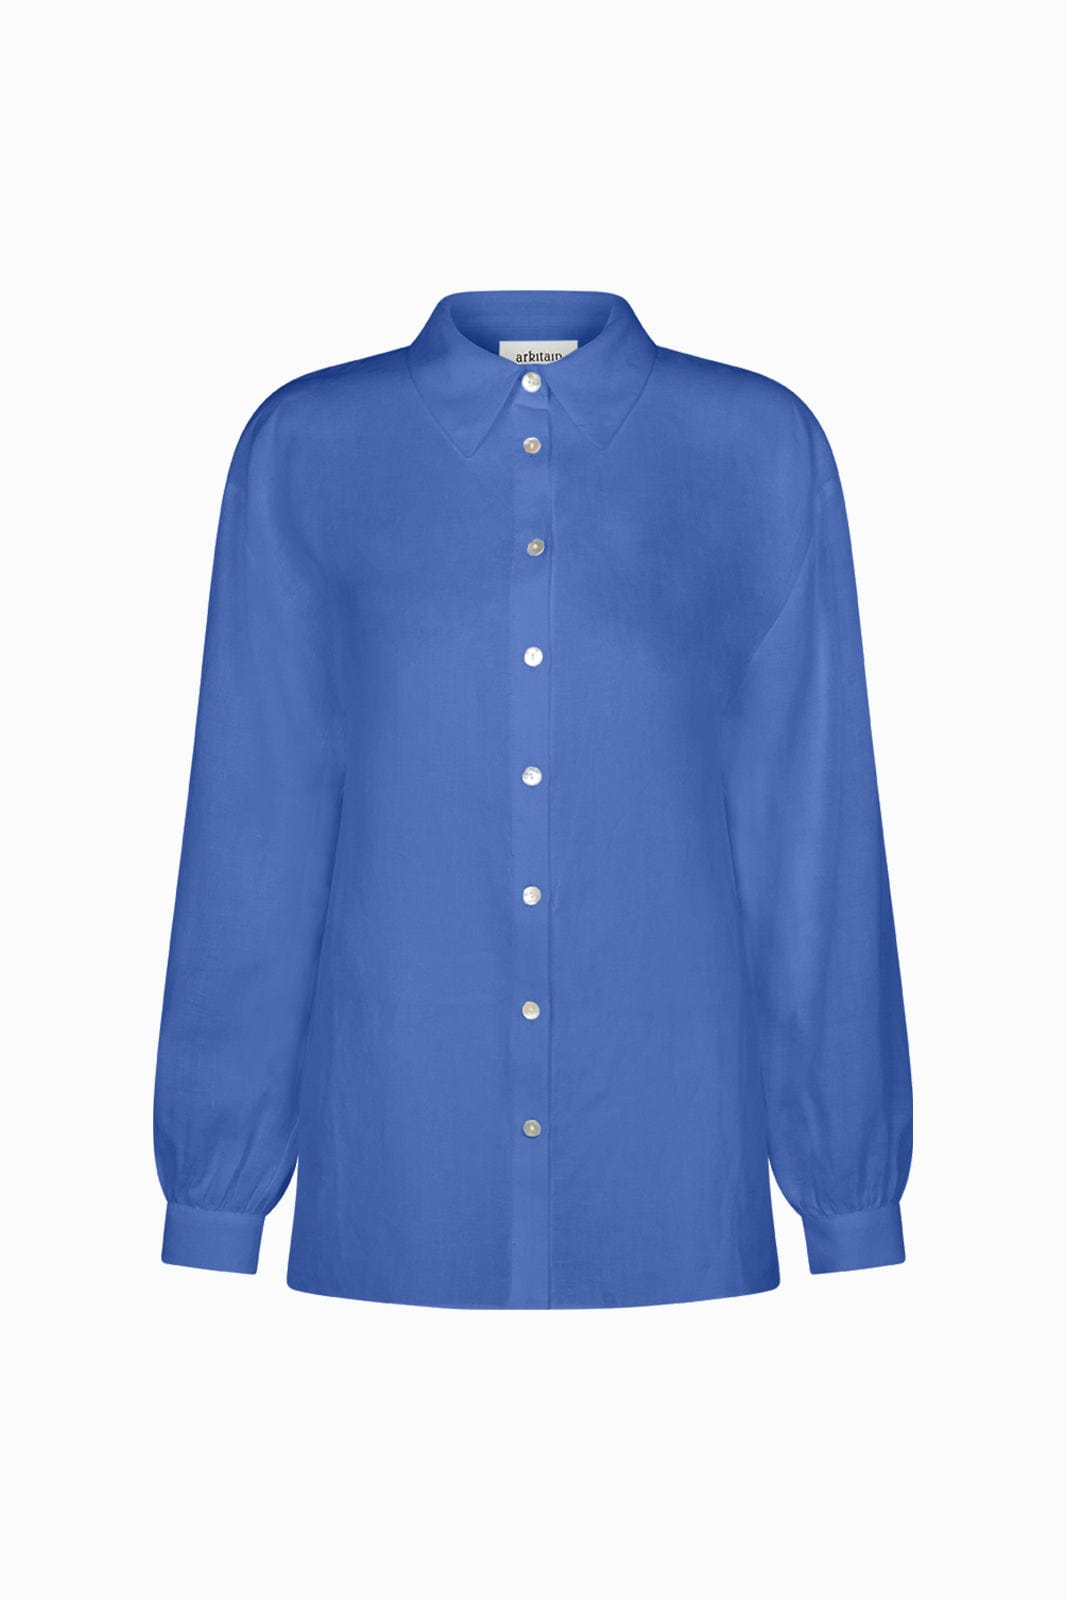 arkitaip Blouses The Gina Oversized Shirt in Klein blue